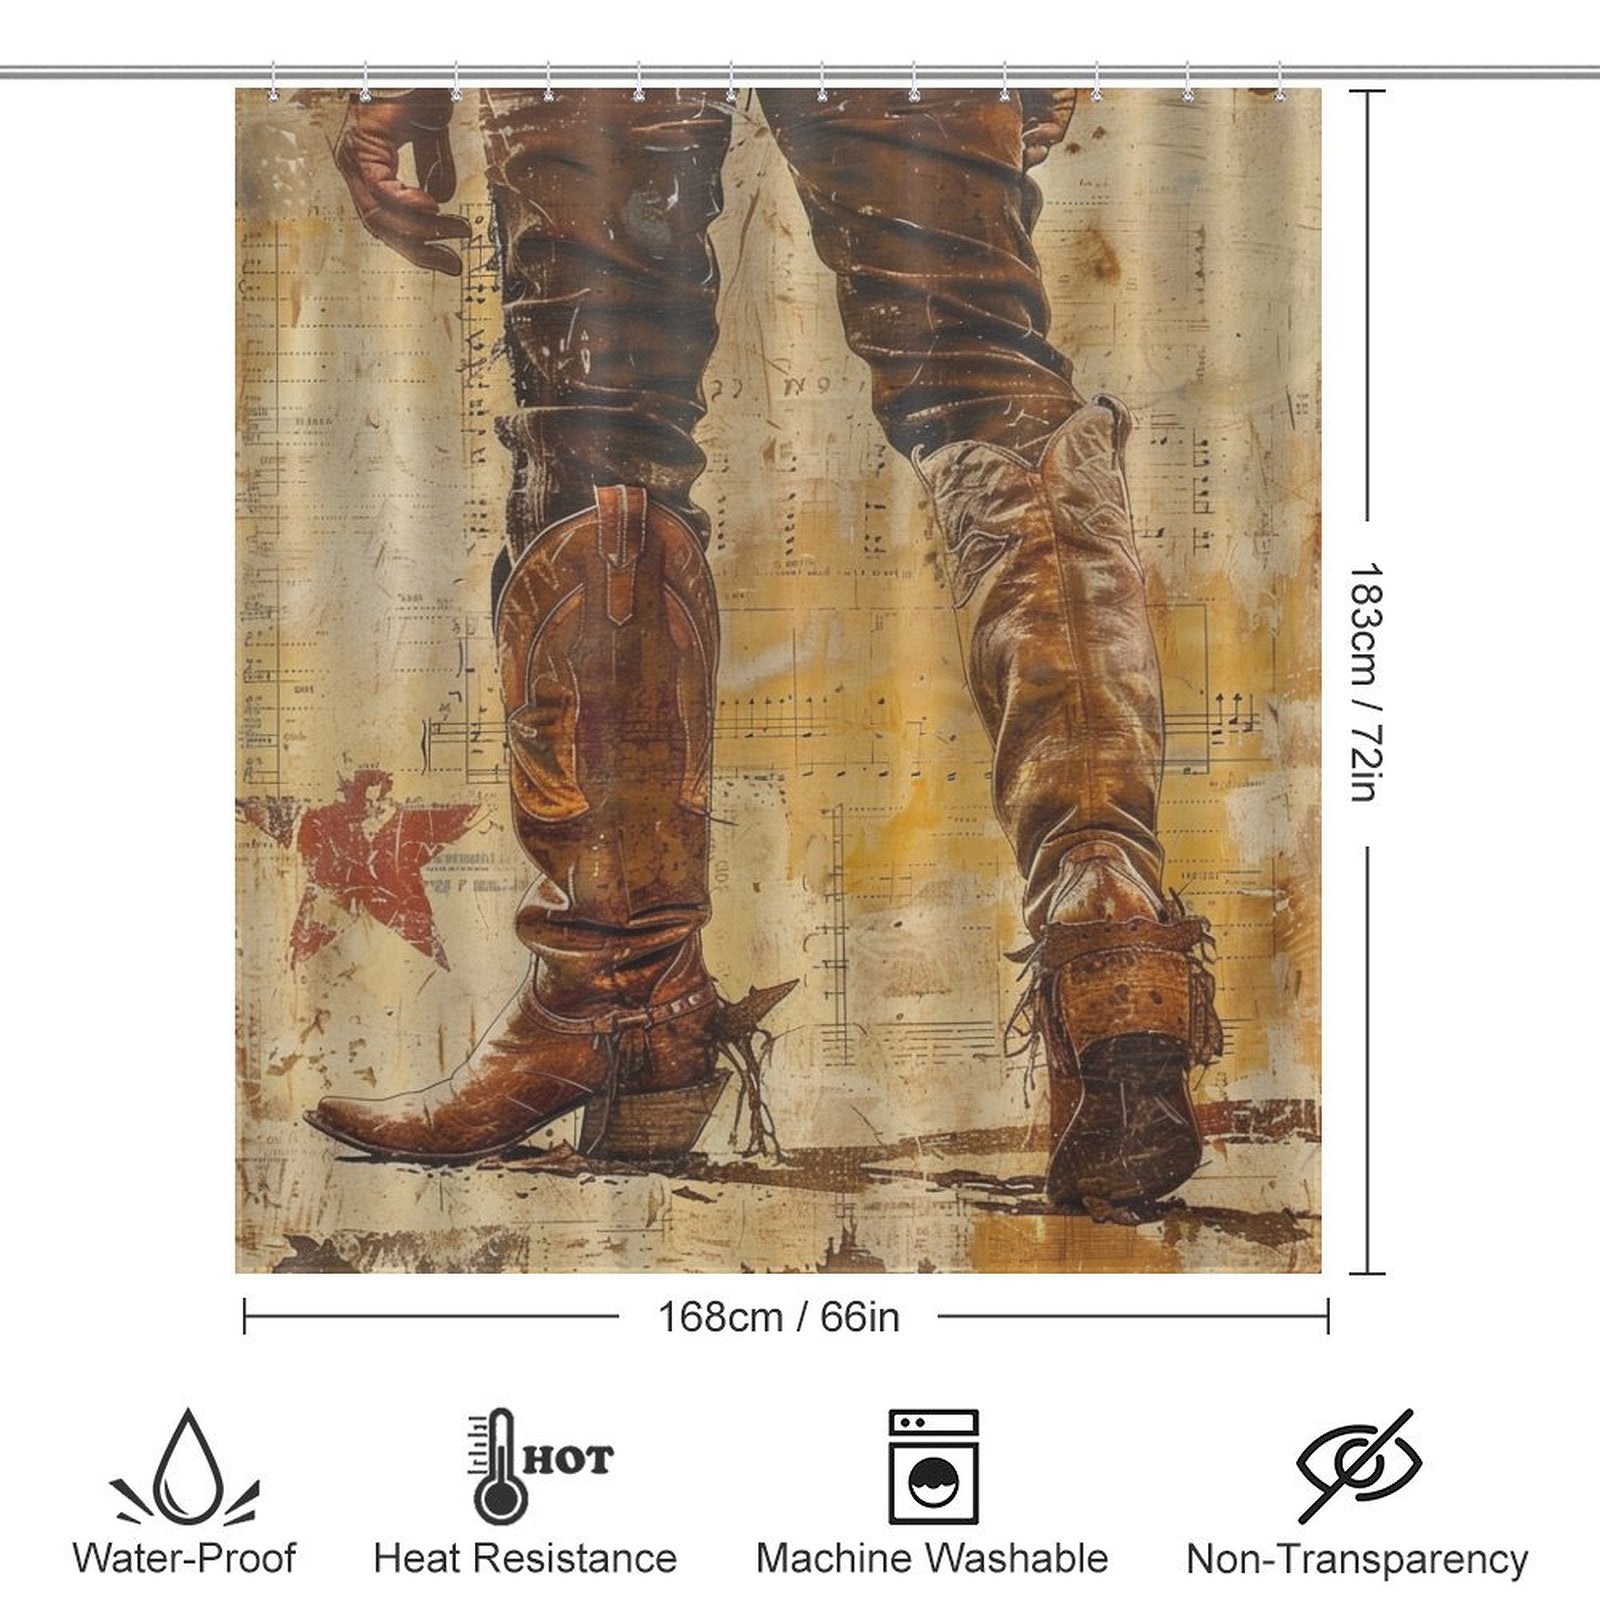 Rugged Textures Cowboy Shower Curtain